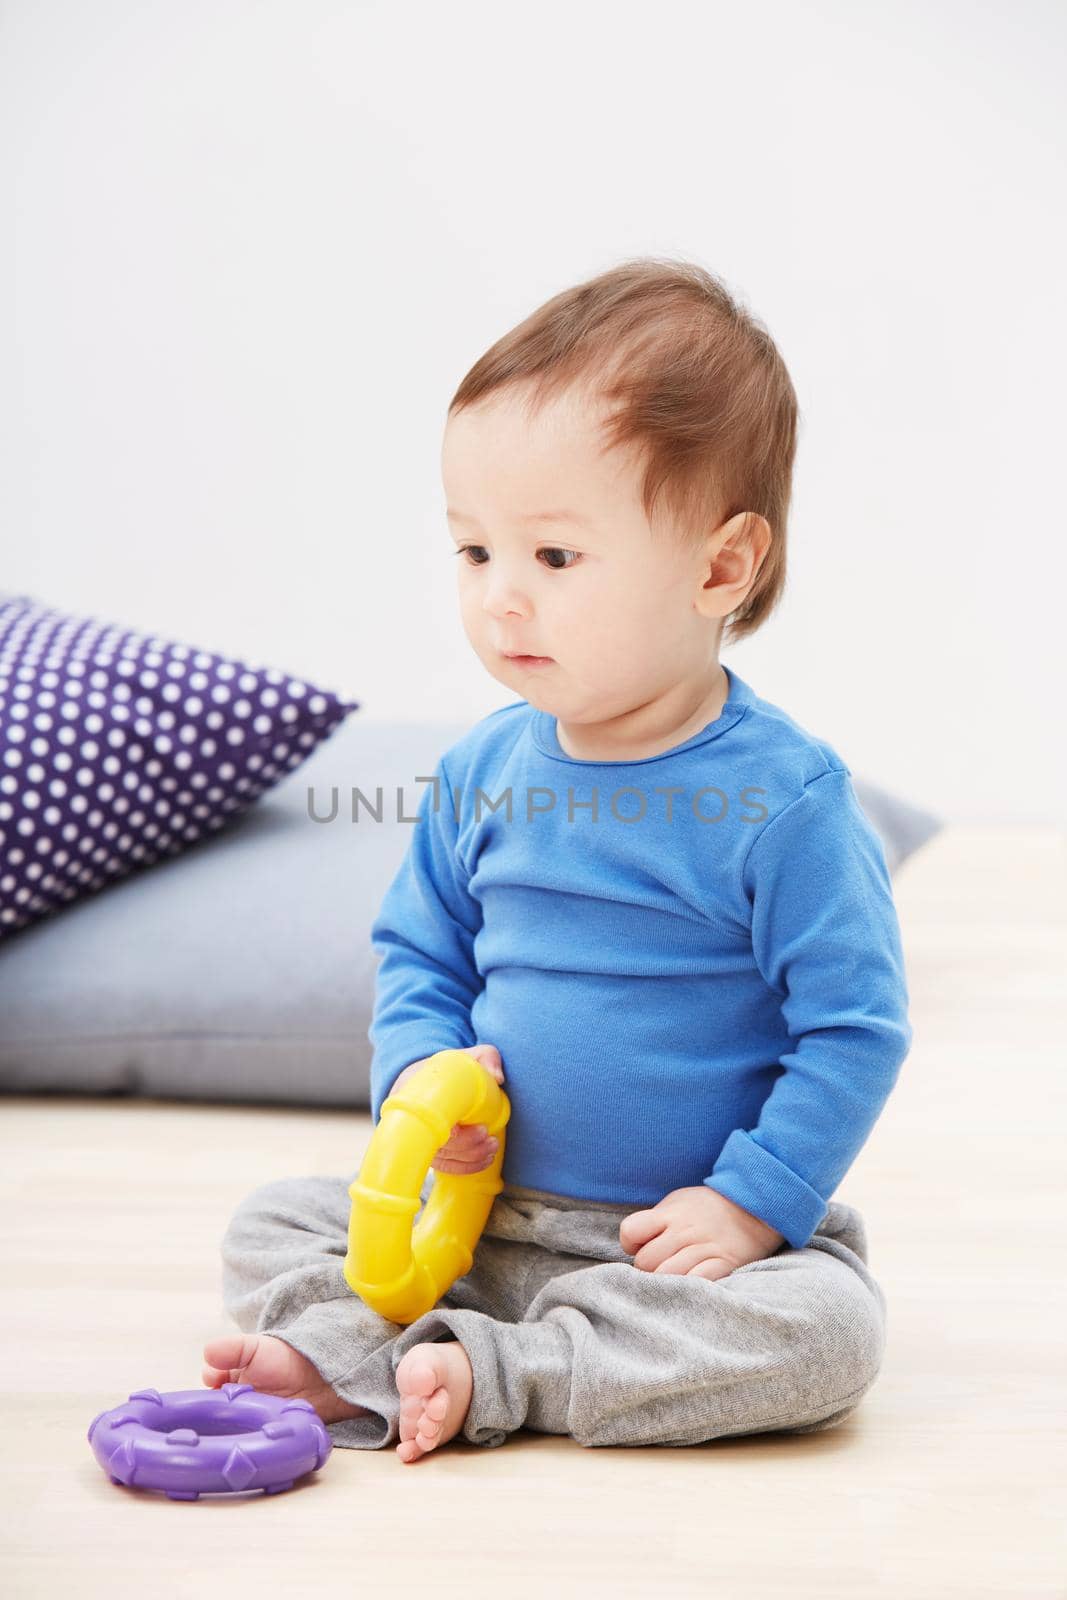 Hes a playful little guy.... Shot of a cute baby boy sitting on the floor and playing with his toys. by YuriArcurs